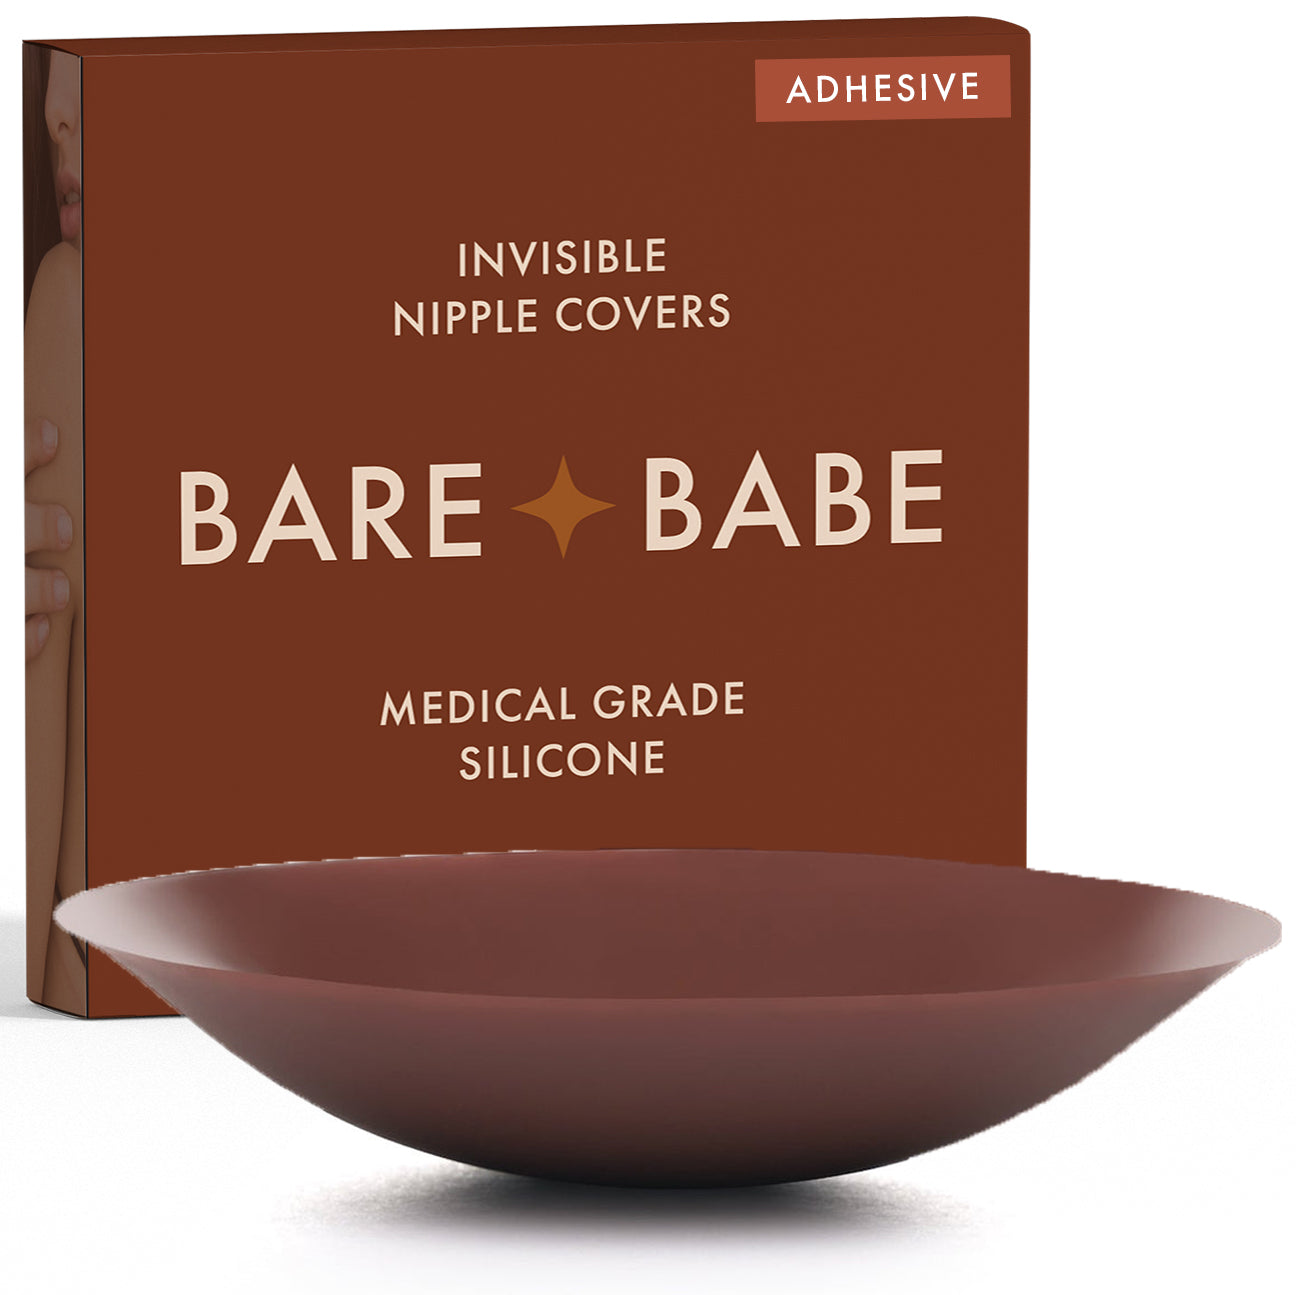 Bare Babe Adhesive Nipple Cover in Cocoa